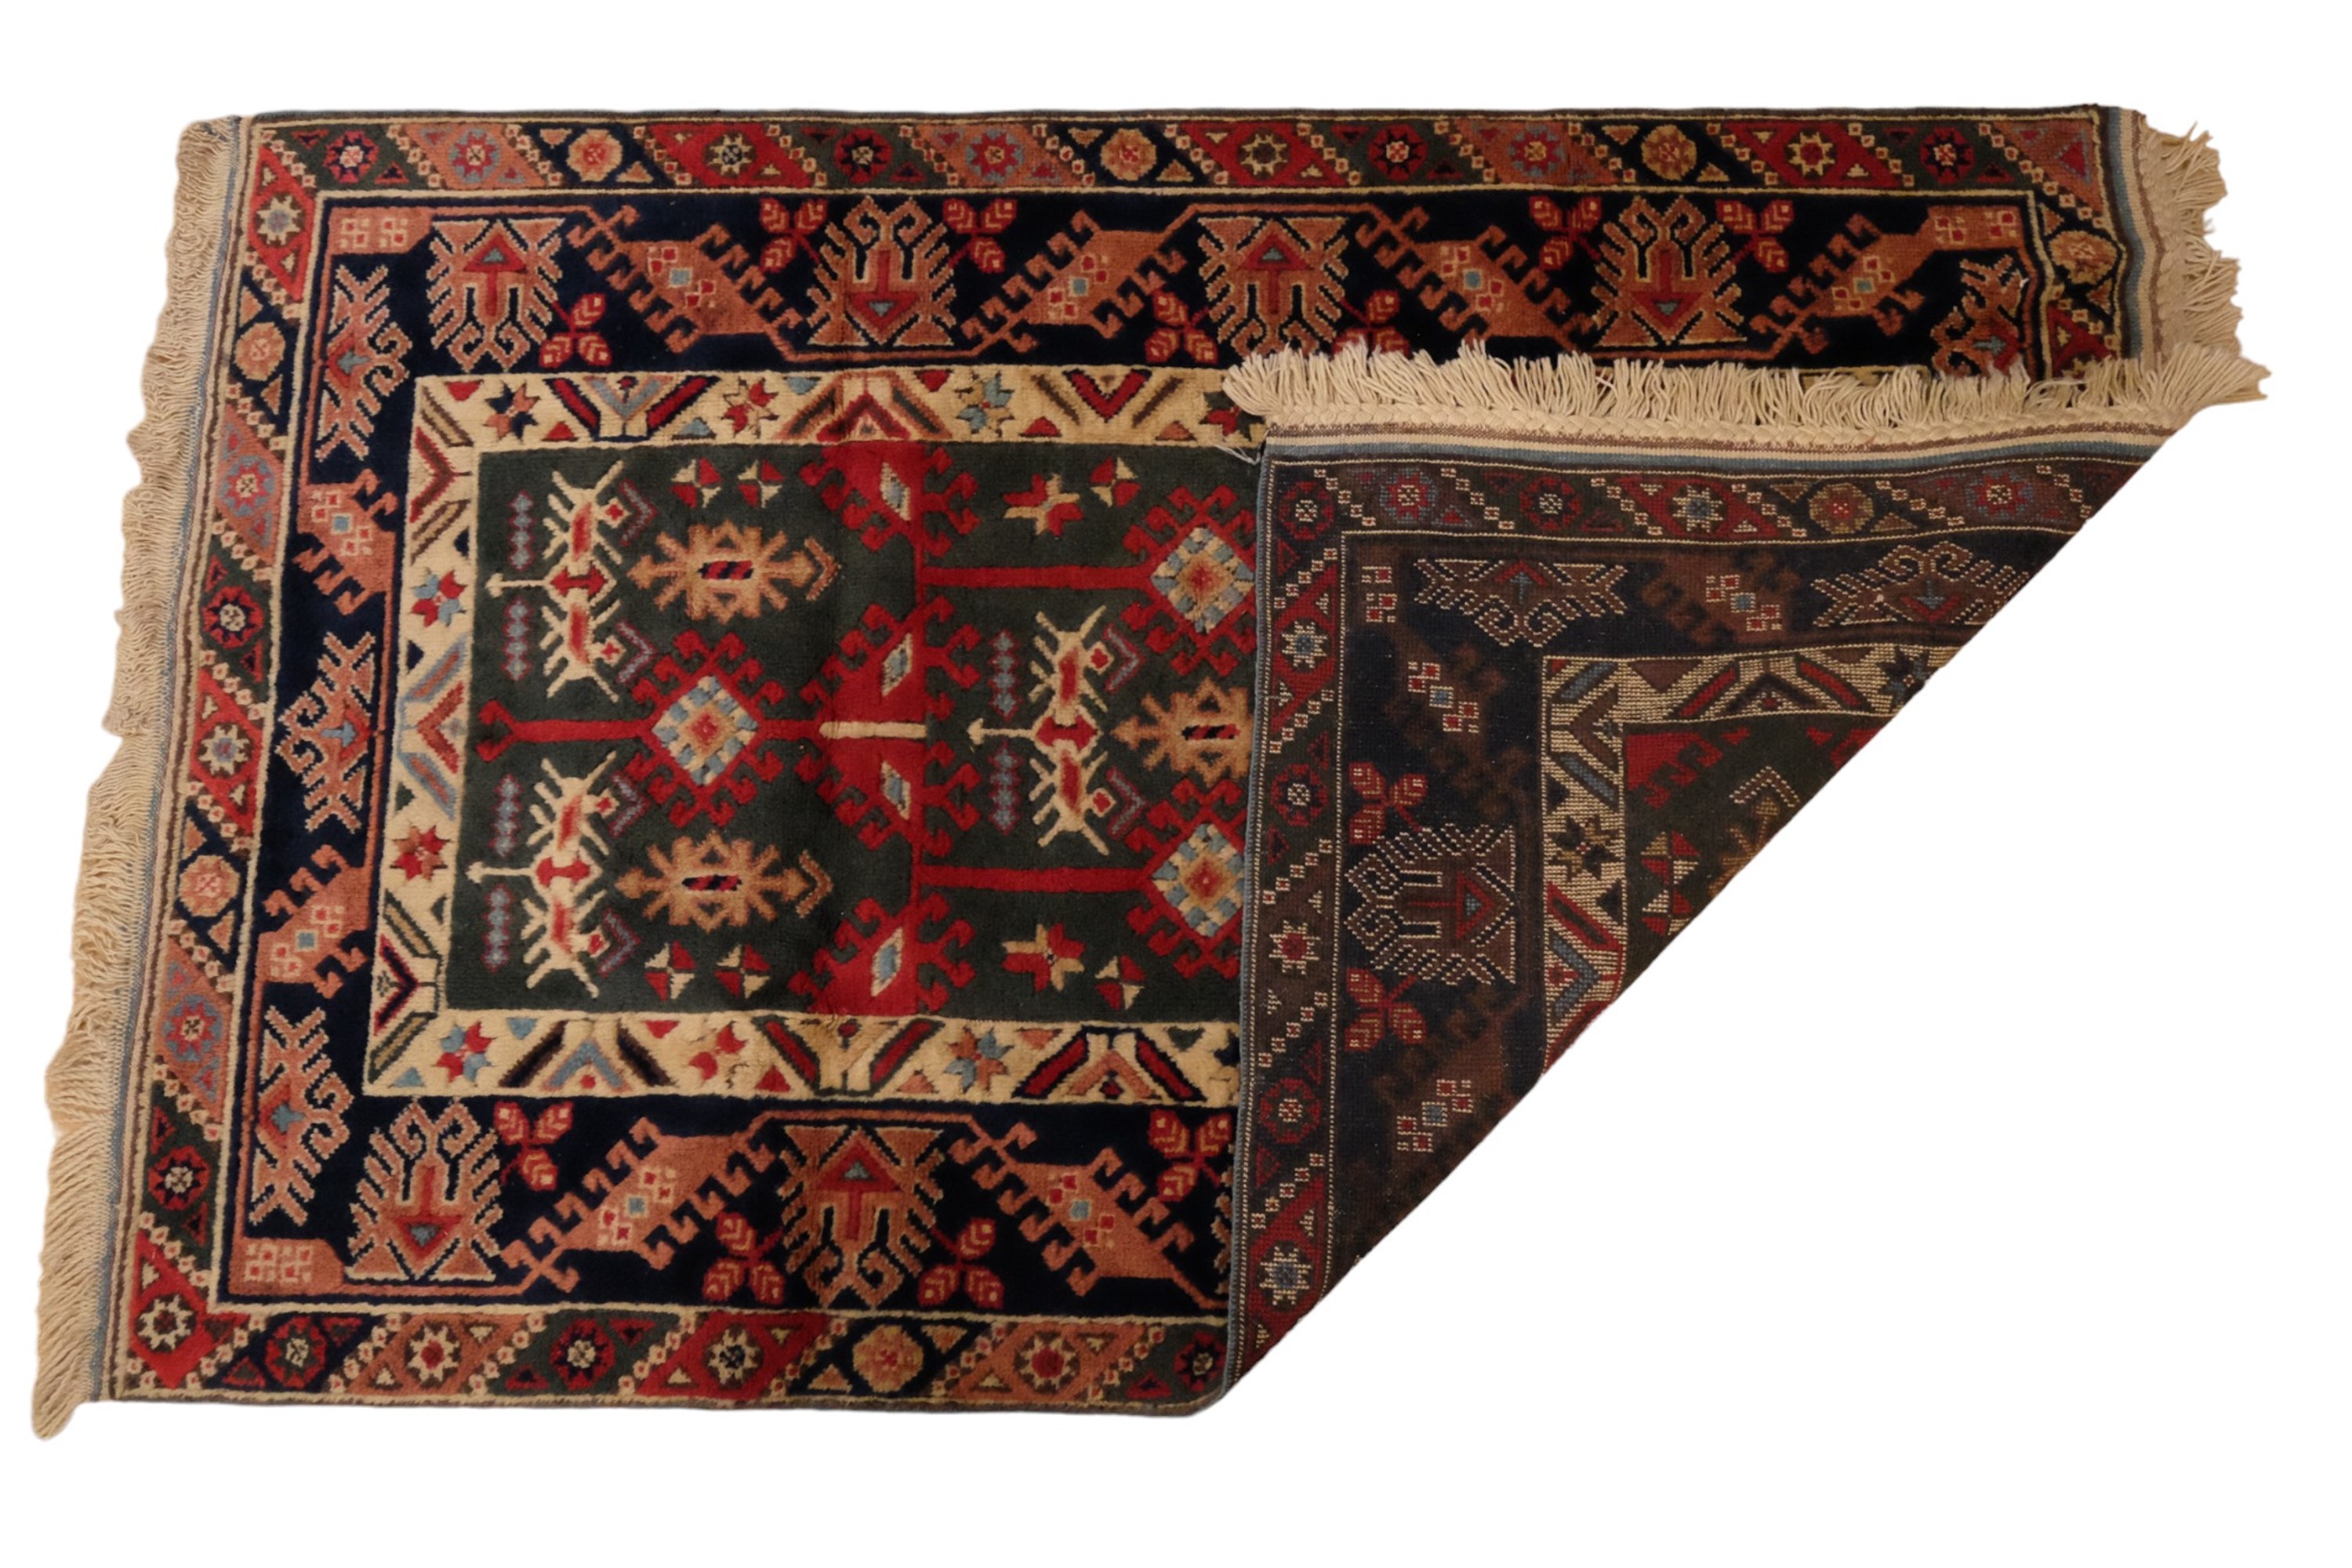 A Turkish (Dosemealti) hand-knotted wool-pile rug, with certificate, 185 x 125 cm - Image 3 of 4